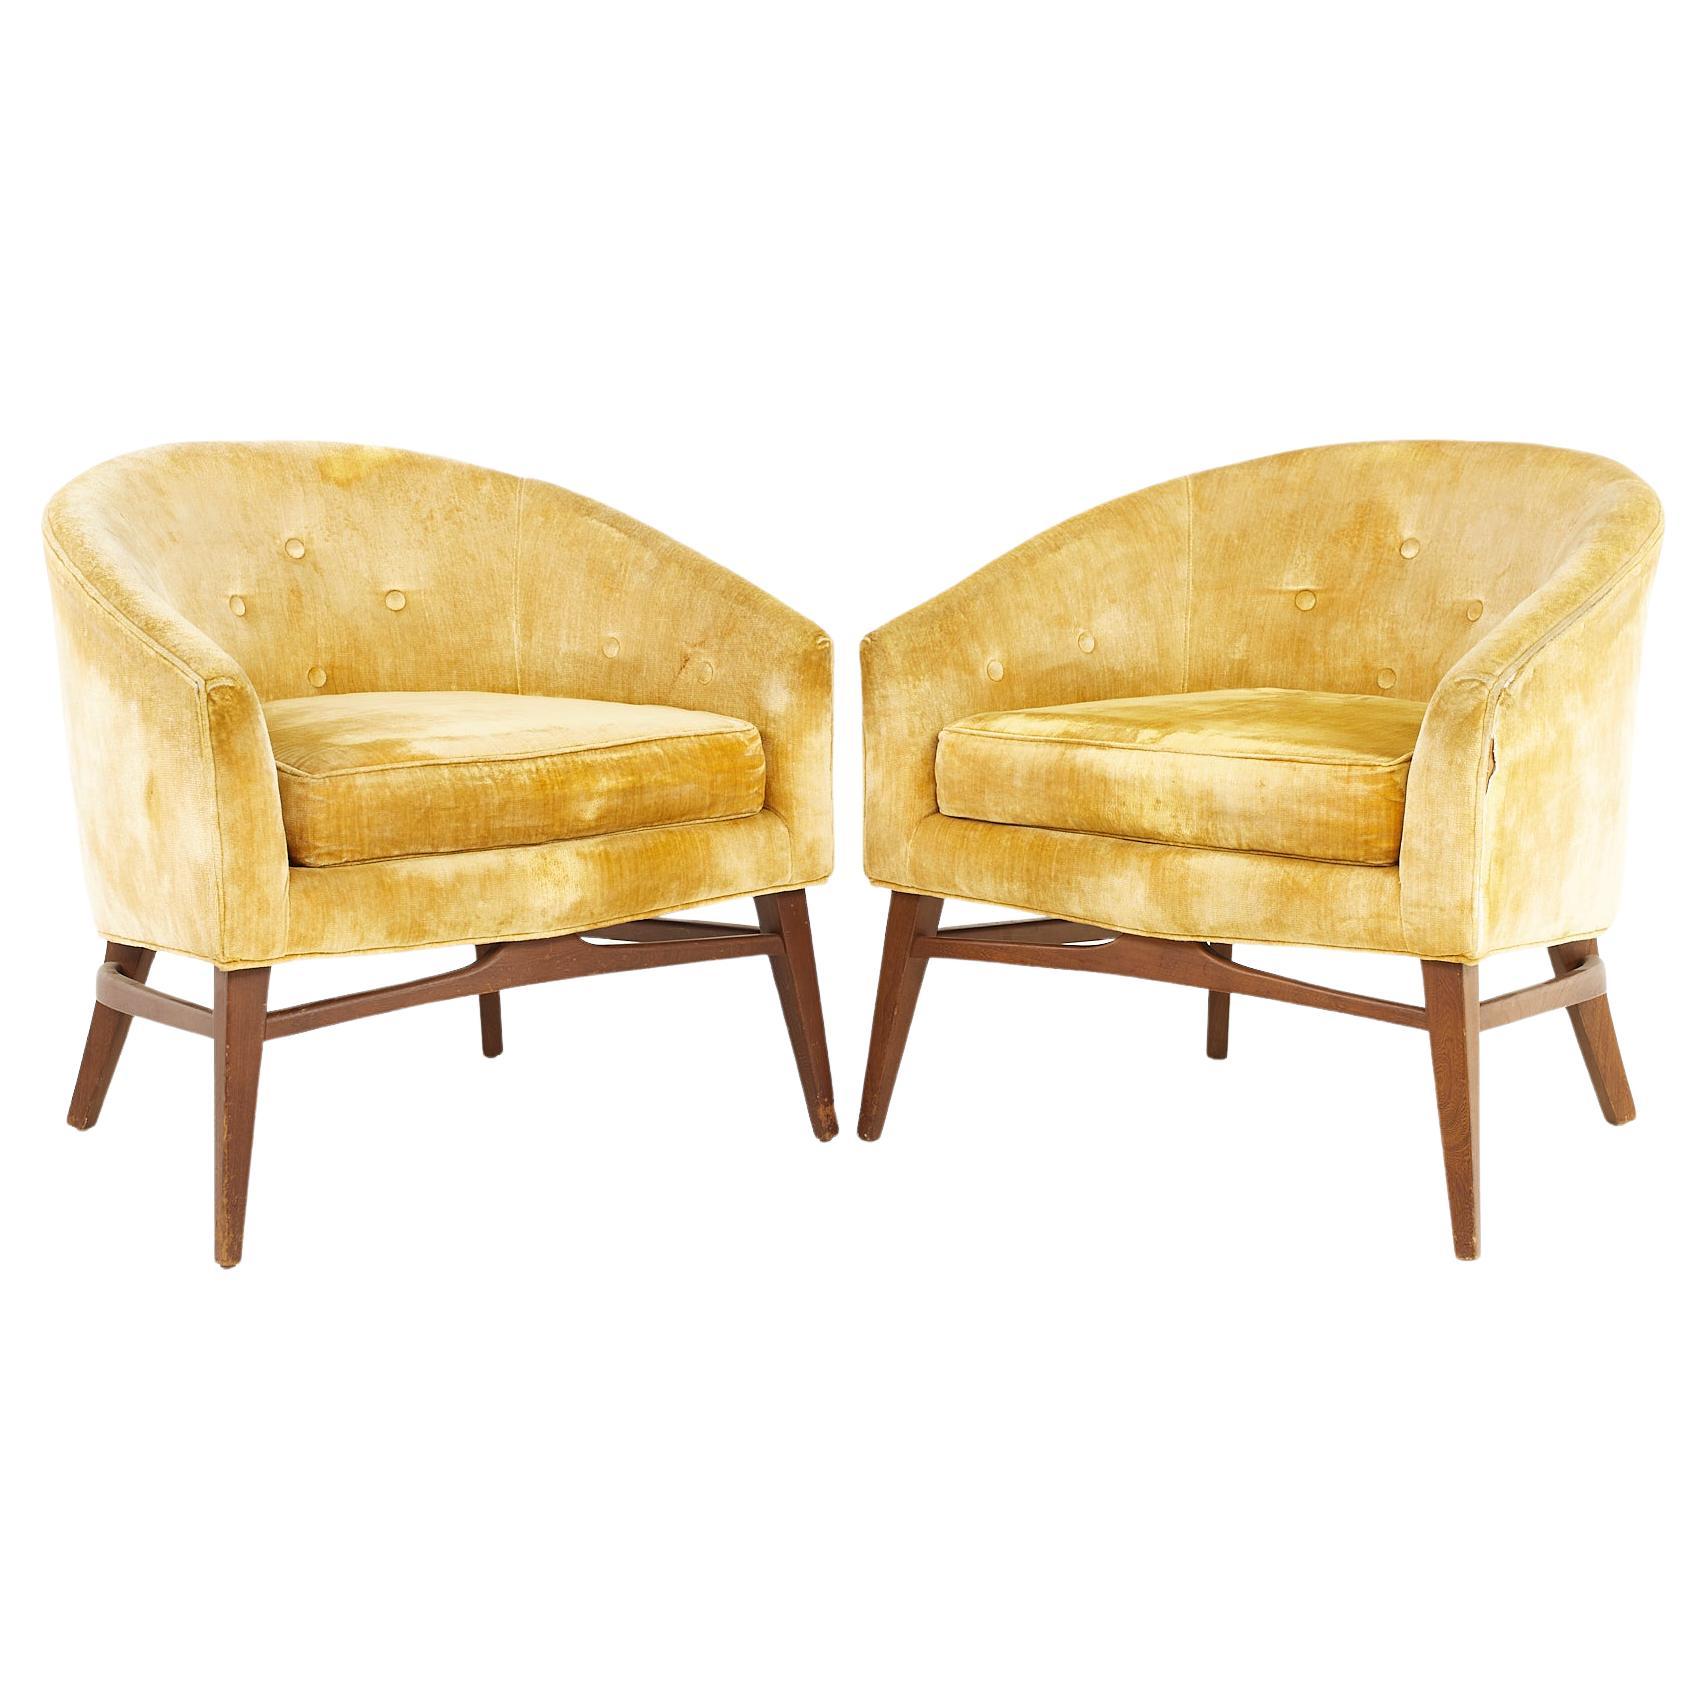 Lawrence Peabody for Craft Associates Mid Century Lounge Chairs, a Pair